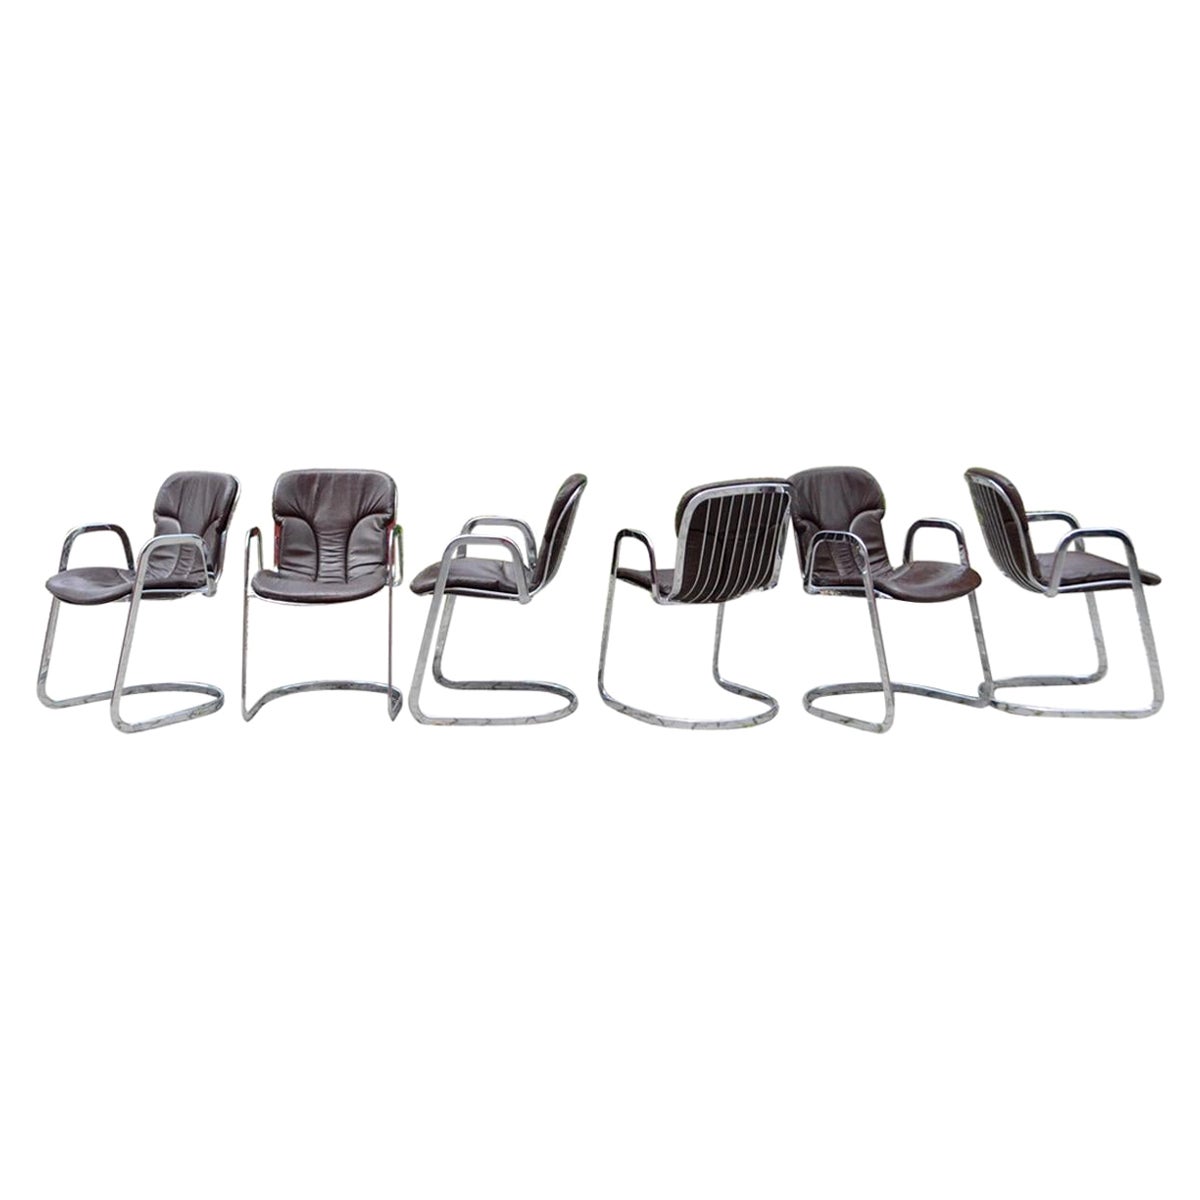 Cidue Dining Armchairs Chairs Set of 6 Chrome and Leather For Sale